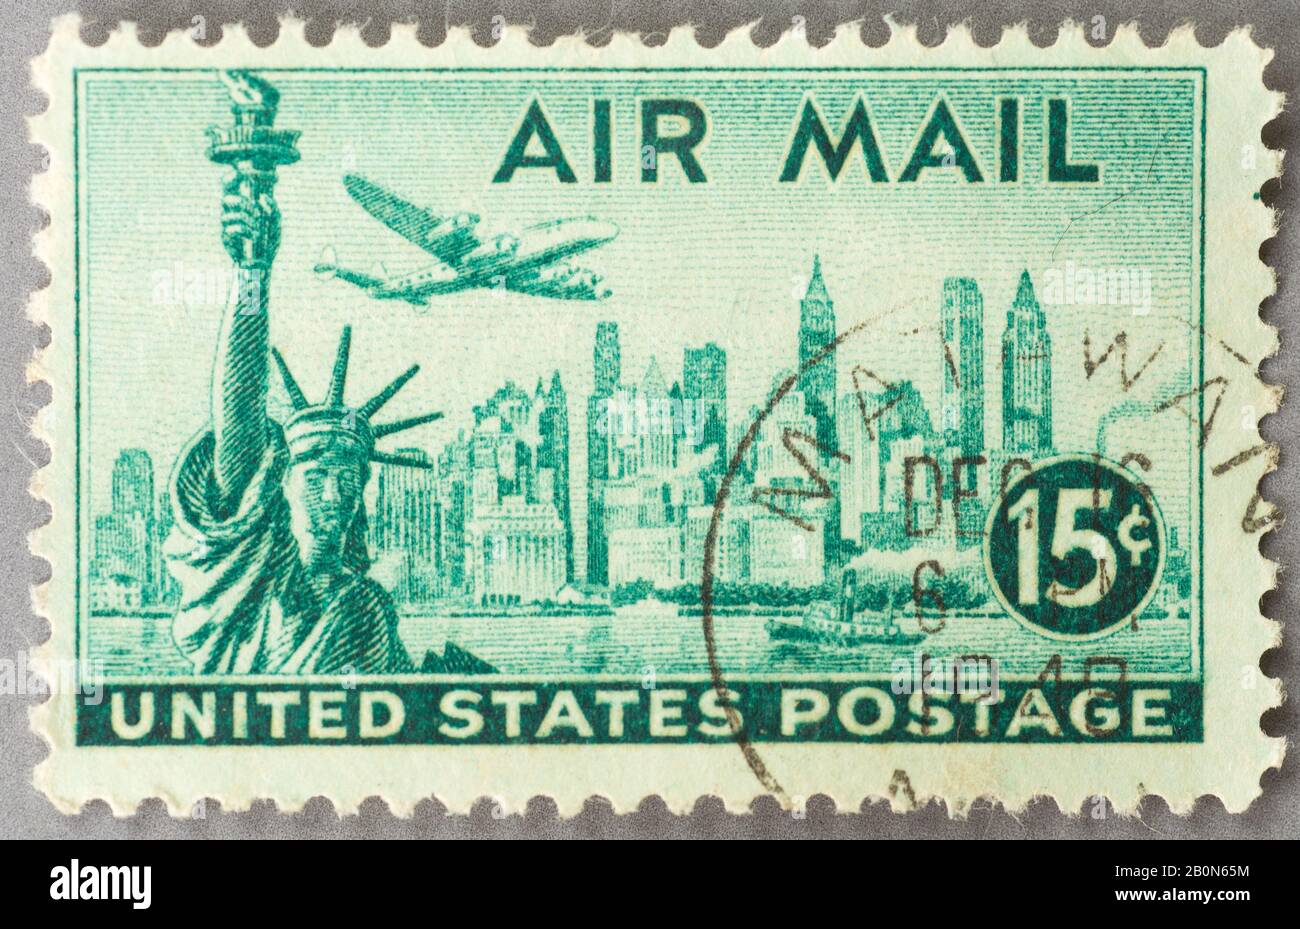 A 1947 15c US Airmail postage stamp featuring Statue of Liberty and New York Skyline. Stock Photo